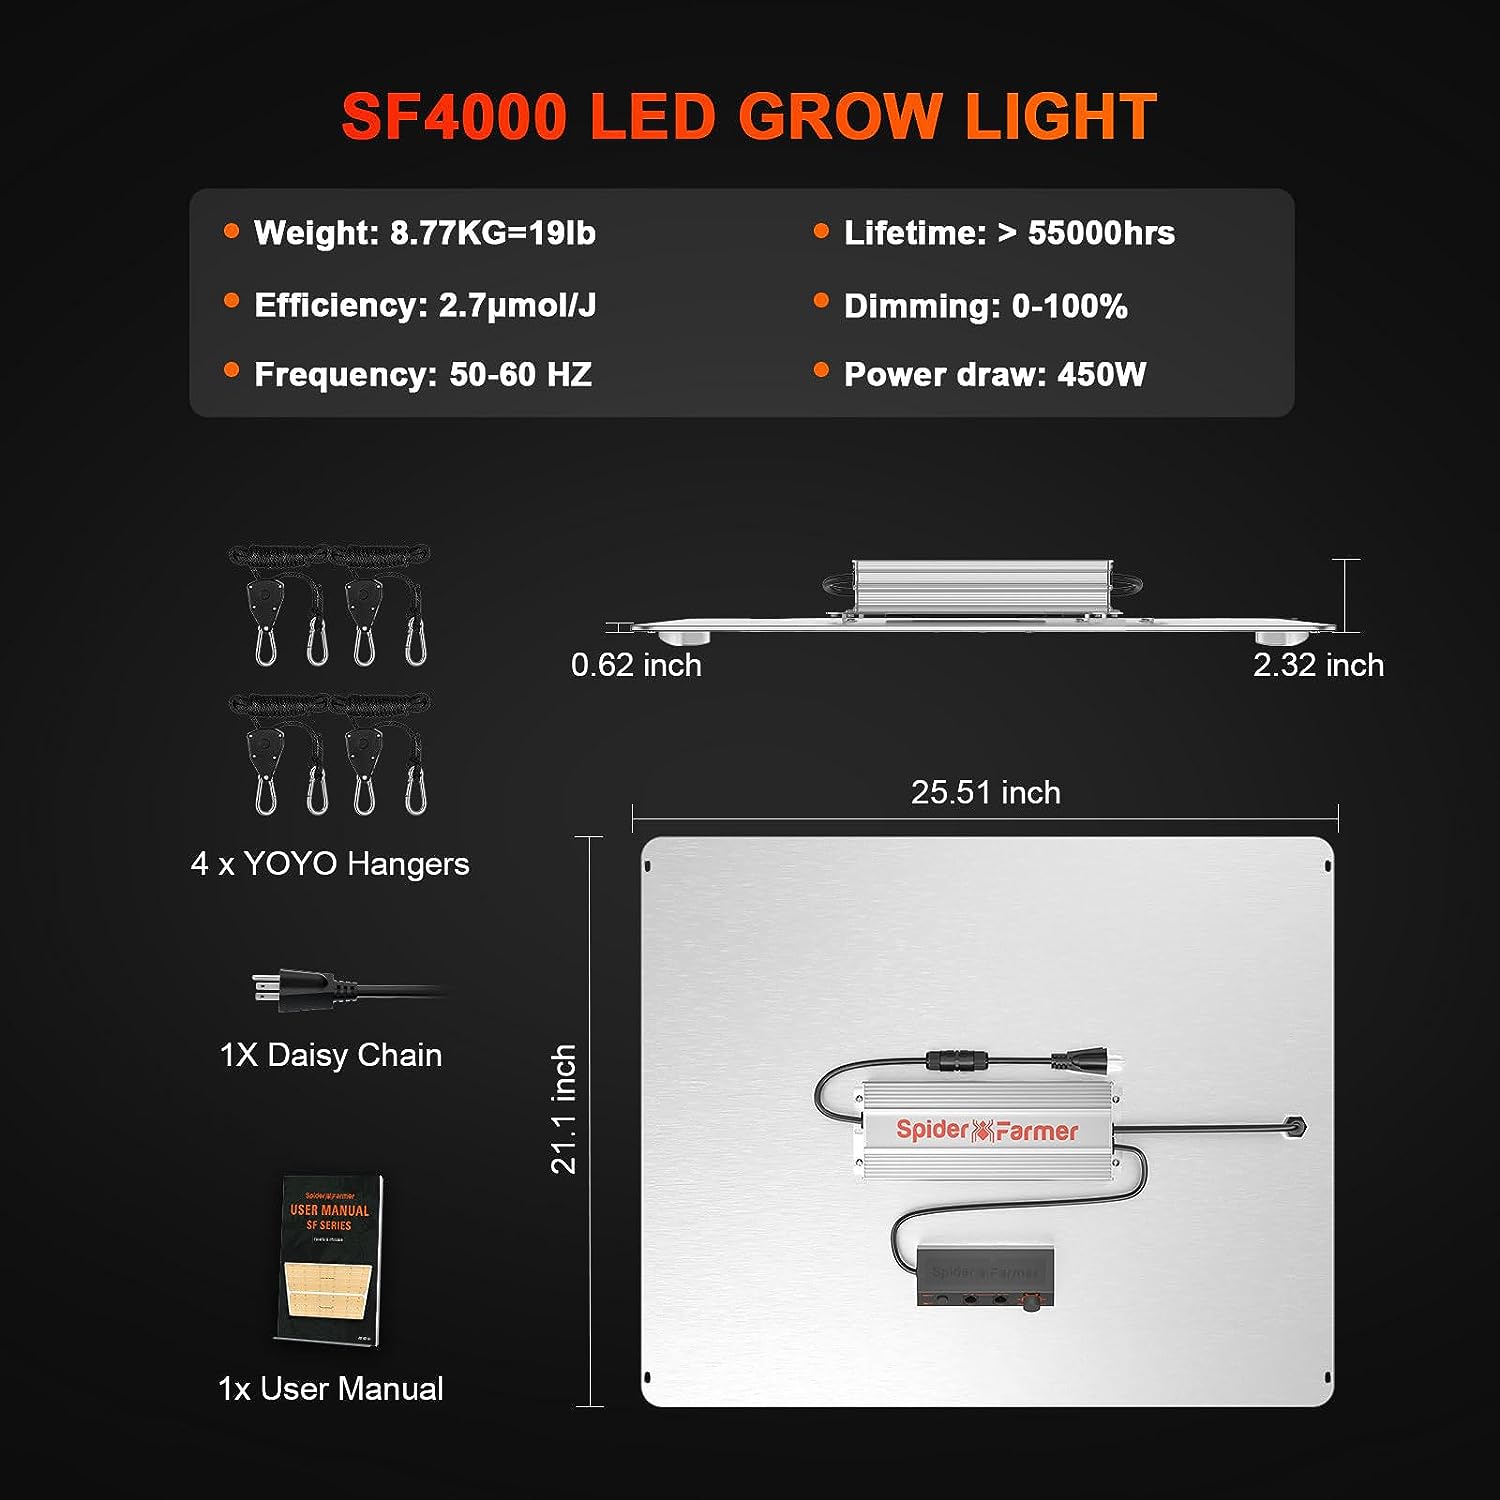 2023 Newest Spider Farmer SF4000 LED Grow Light with Samsung LM301B Diodes Deeper Penetration  Dimmable 450W Full Spectrum Grow Lighting for Veg Bloom Indoor Plants in Grow Greenhouses Tents 4x4/5x5